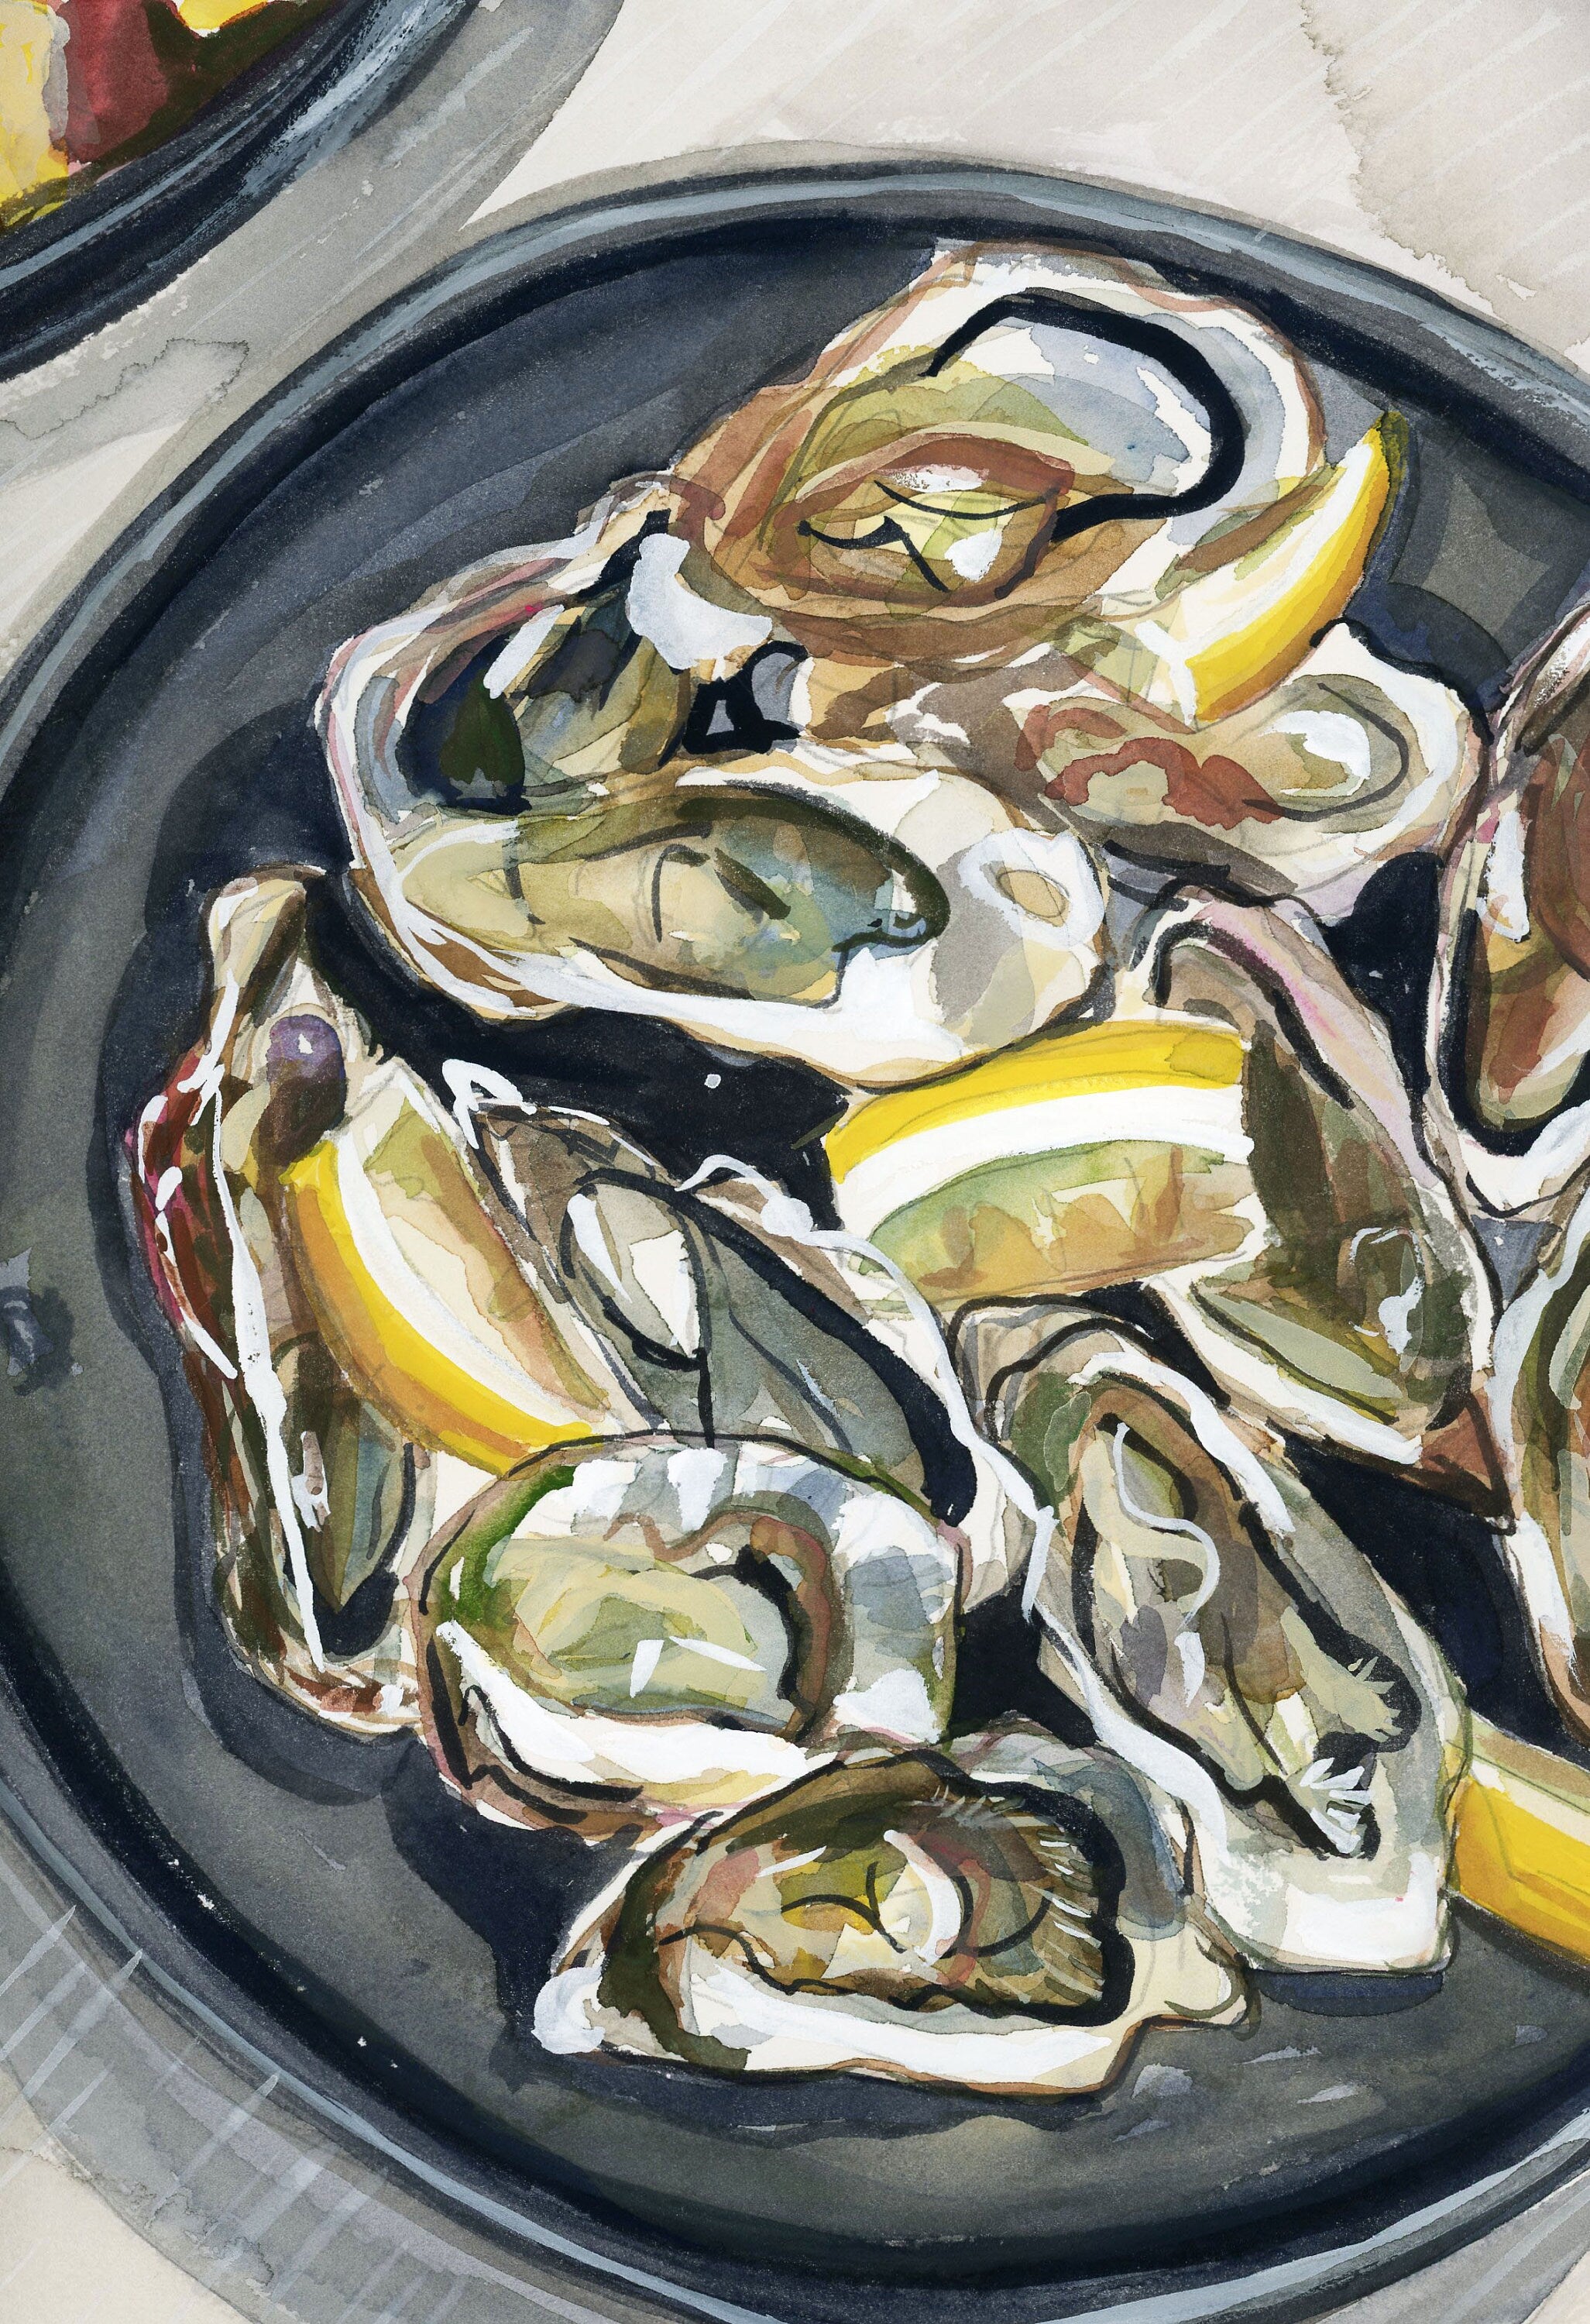 Black oyster watercolor print of painting by Medjool Studio. Print of original gouache painting that captures the delicate intricacies of an oyster shell in a mesmerizing watercolor style.